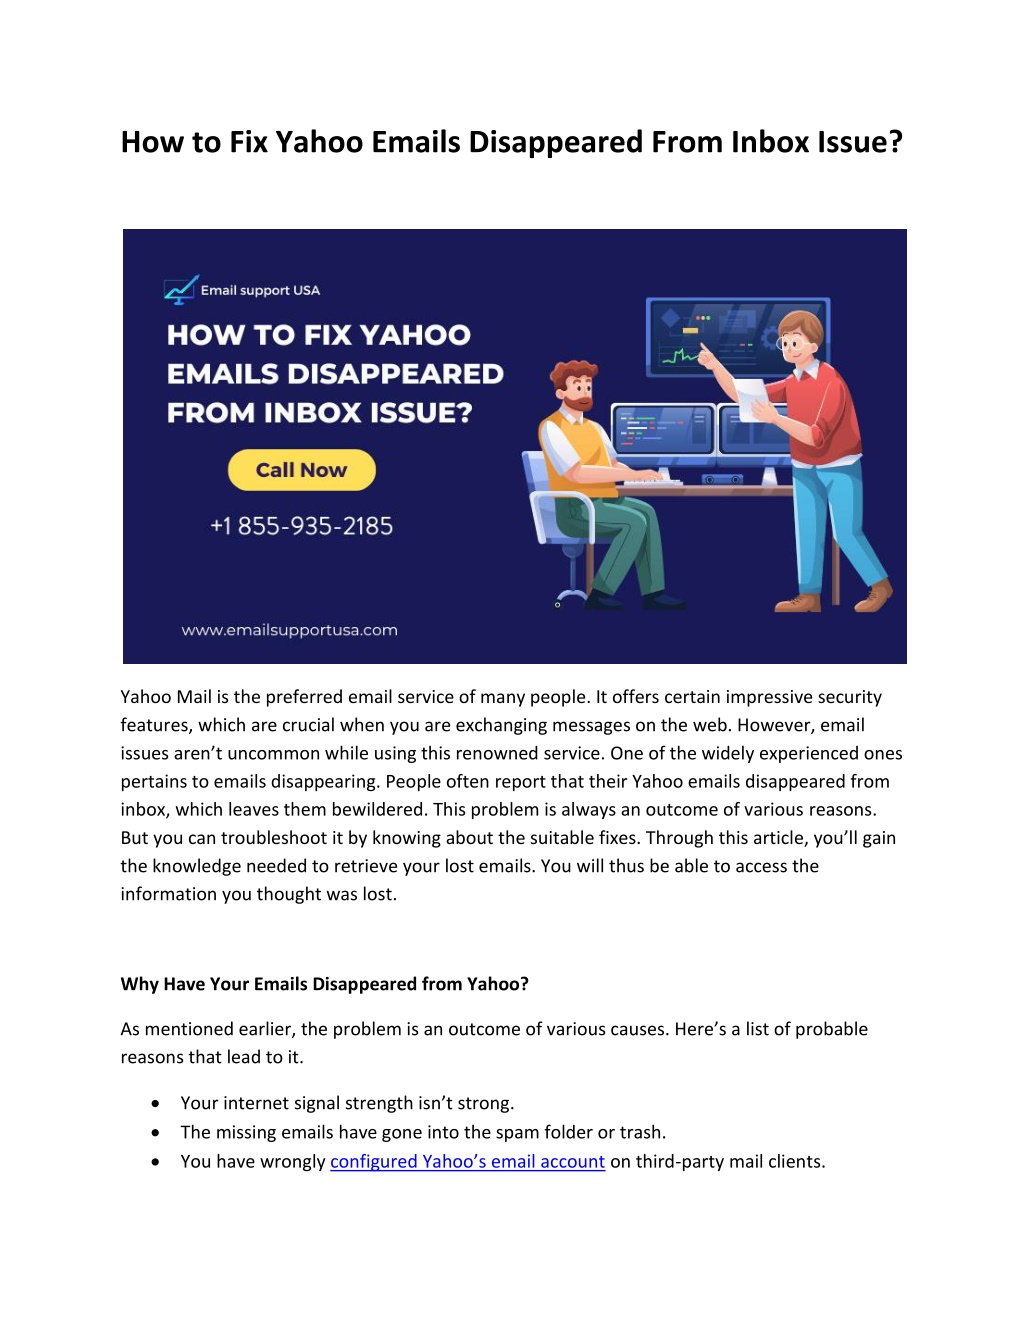 PPT How to Fix Yahoo Emails Disappeared From Inbox Issue? PowerPoint